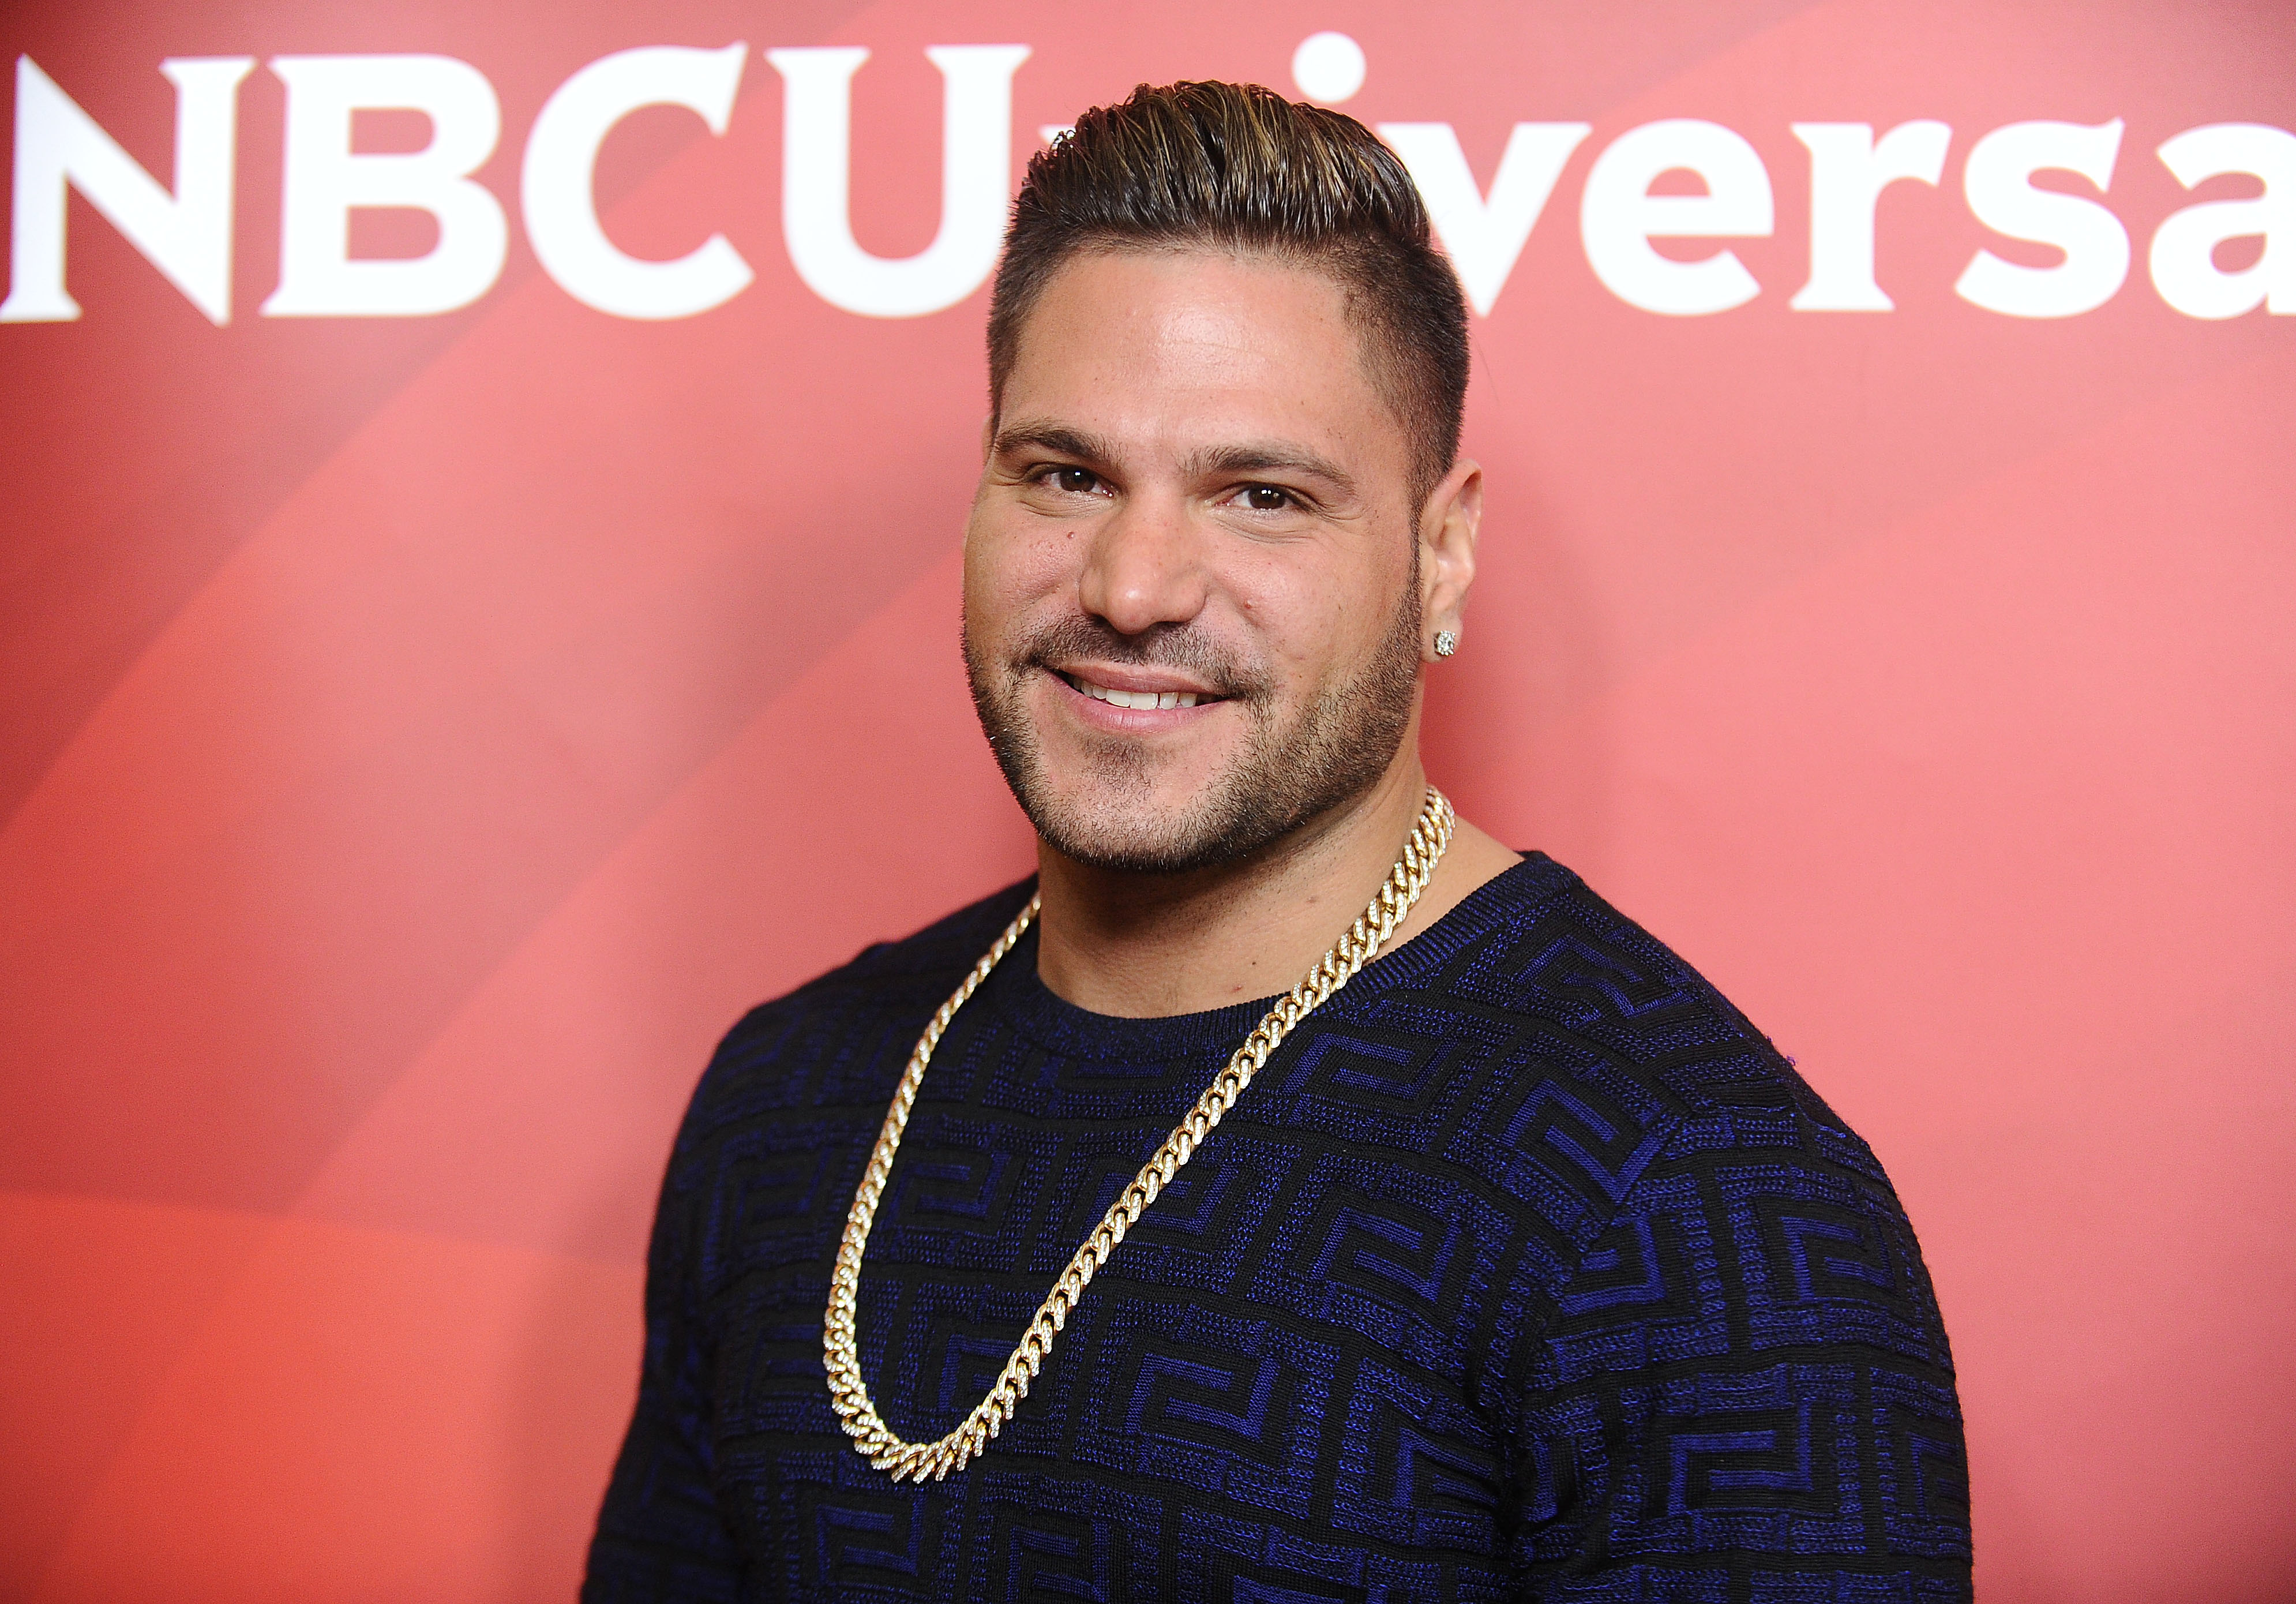 ‘Jersey Shore’: Ronnie Ortiz Magro and 2 Other Roommates Who Released Music